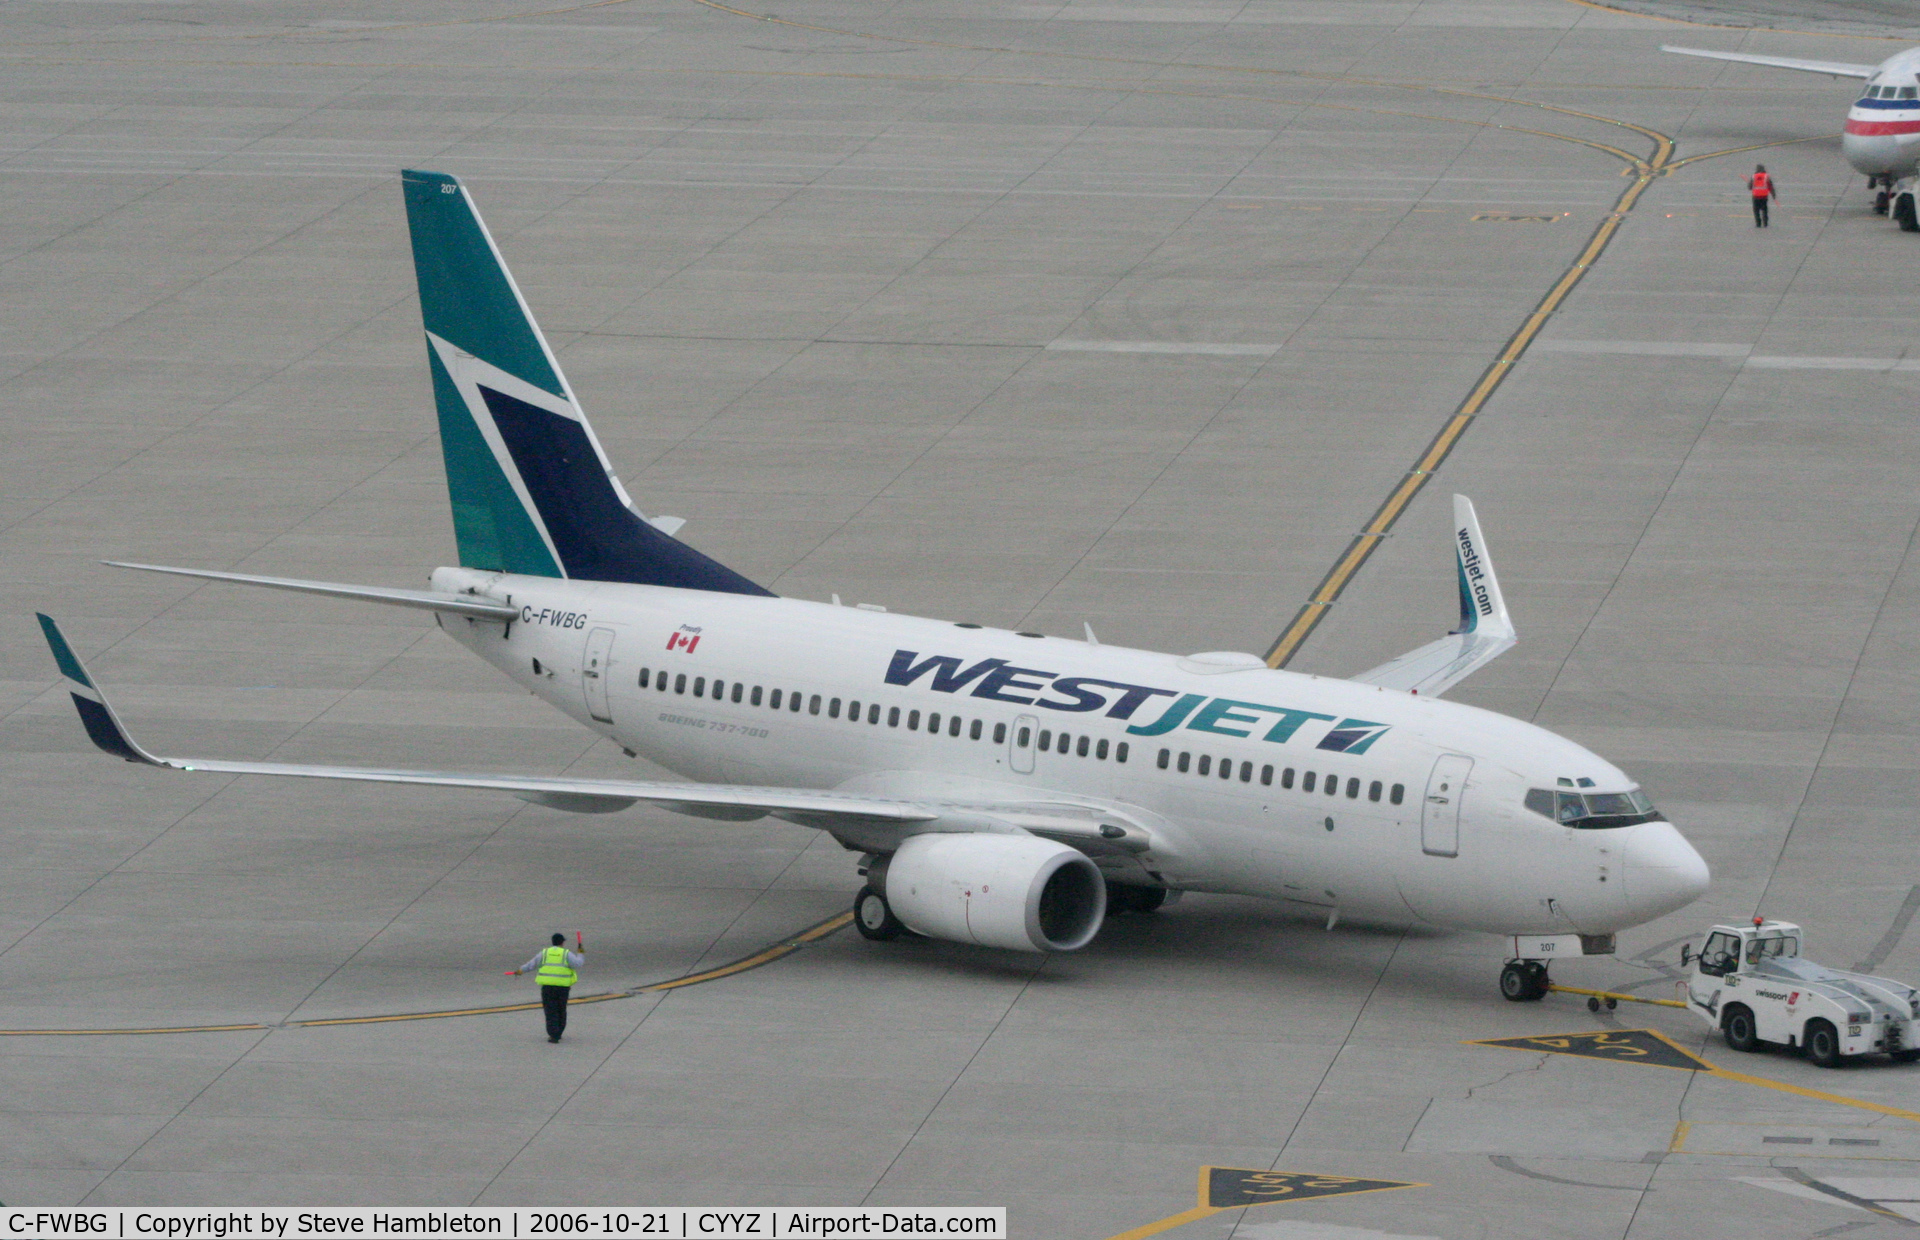 C-FWBG, 2003 Boeing 737-7CT C/N 32749, Taken from the bedroom window of the Sheraton Hotel